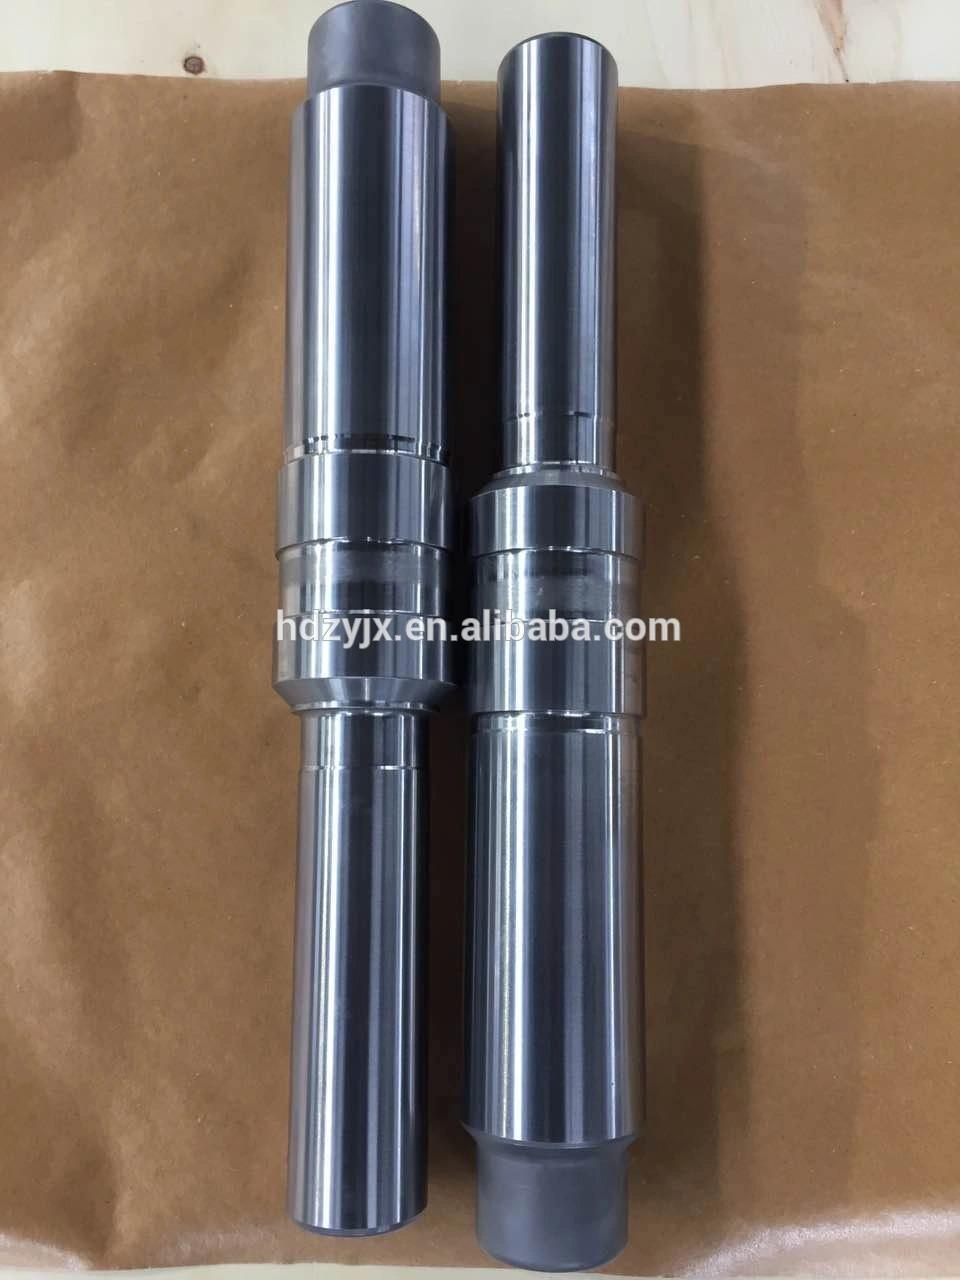 Hydraulic Hammer Bush for Excavator Outer Bush Parts